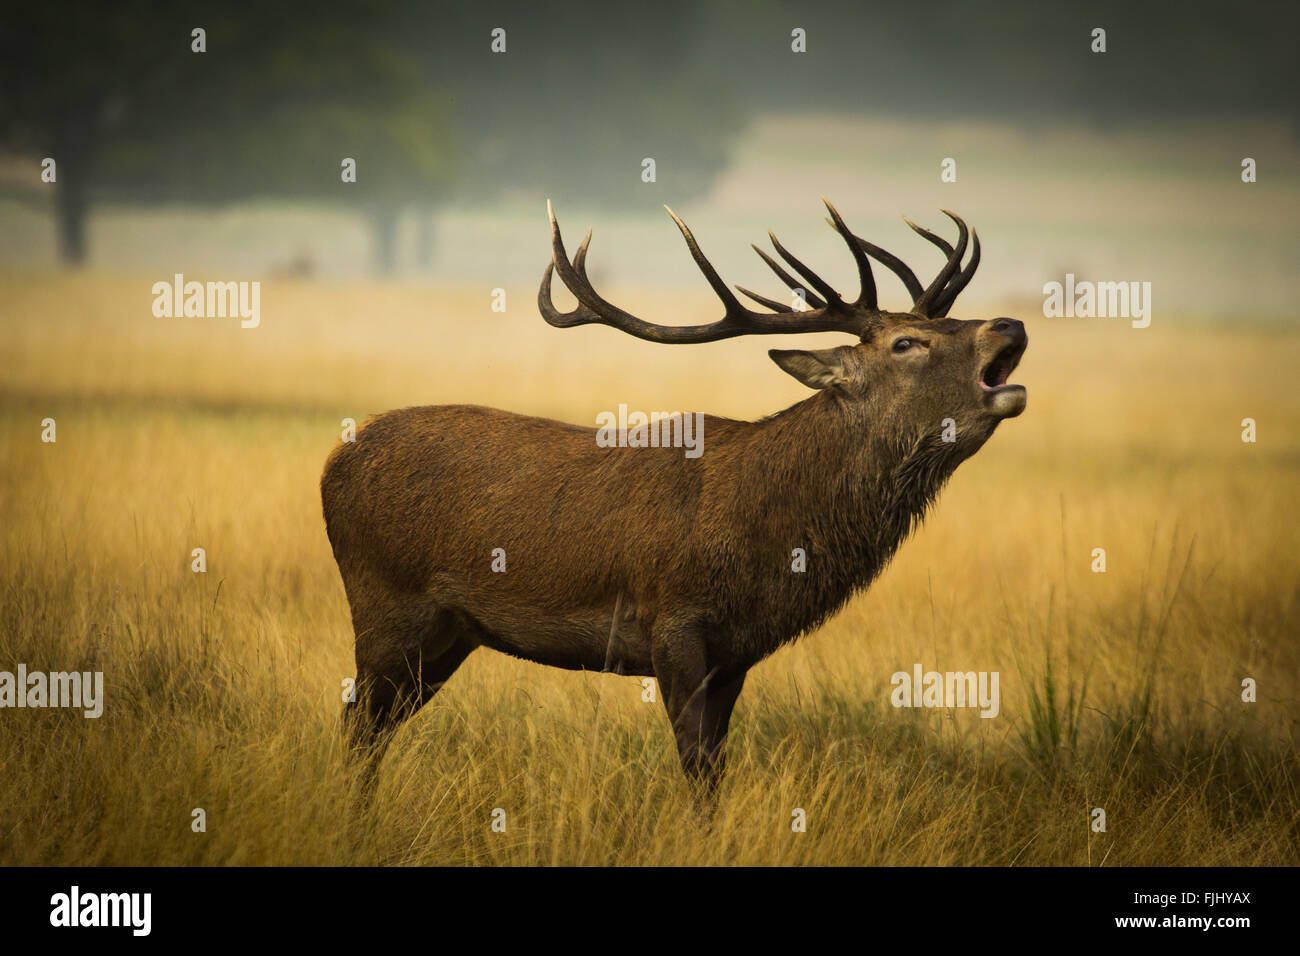 Bellowing Stag Stock Photo